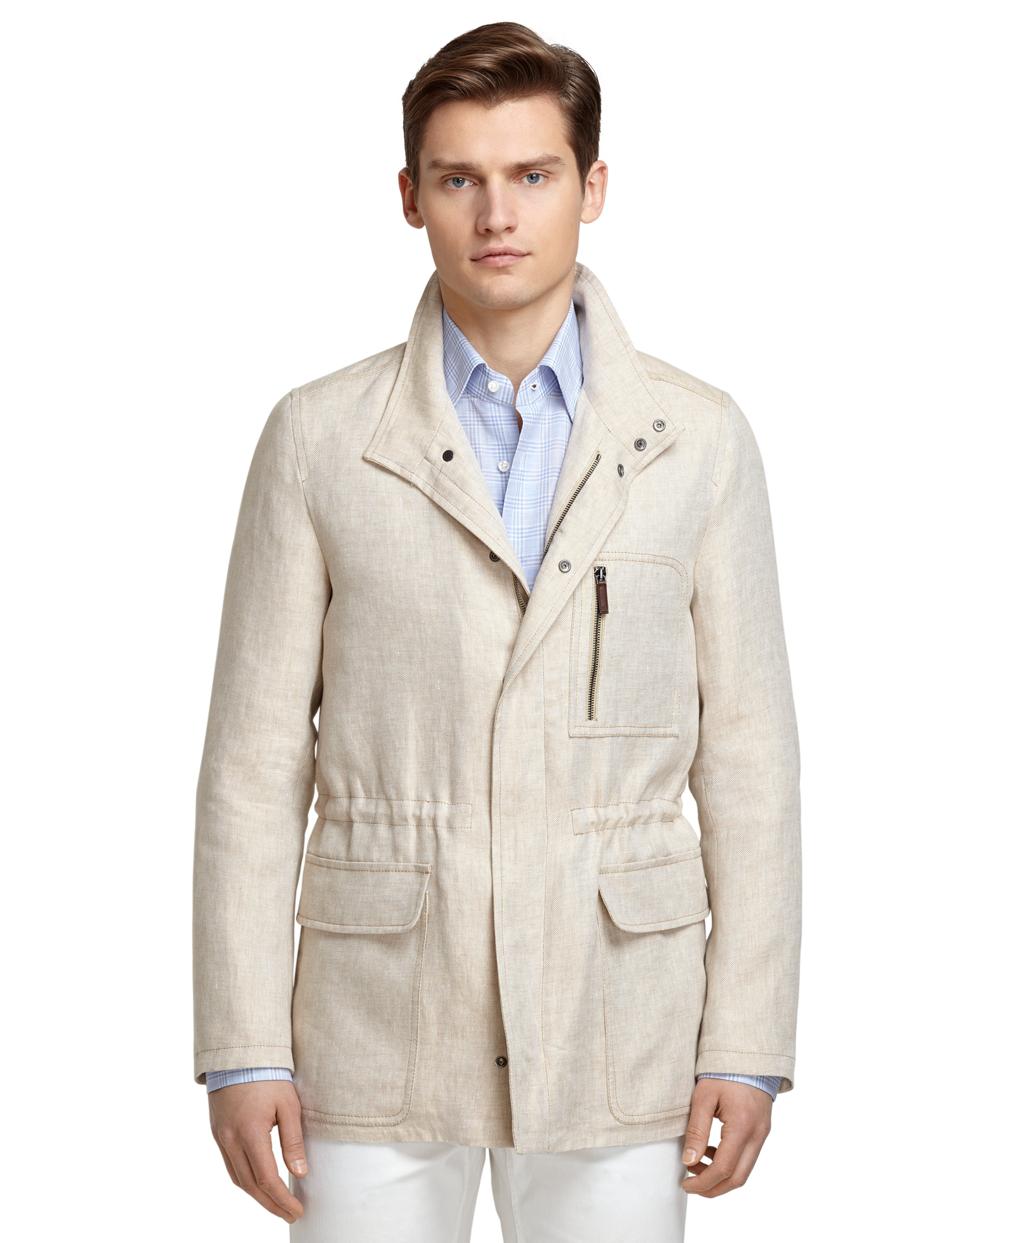 Brooks Brothers Military Jacket in Khaki (Natural) for Men - Lyst